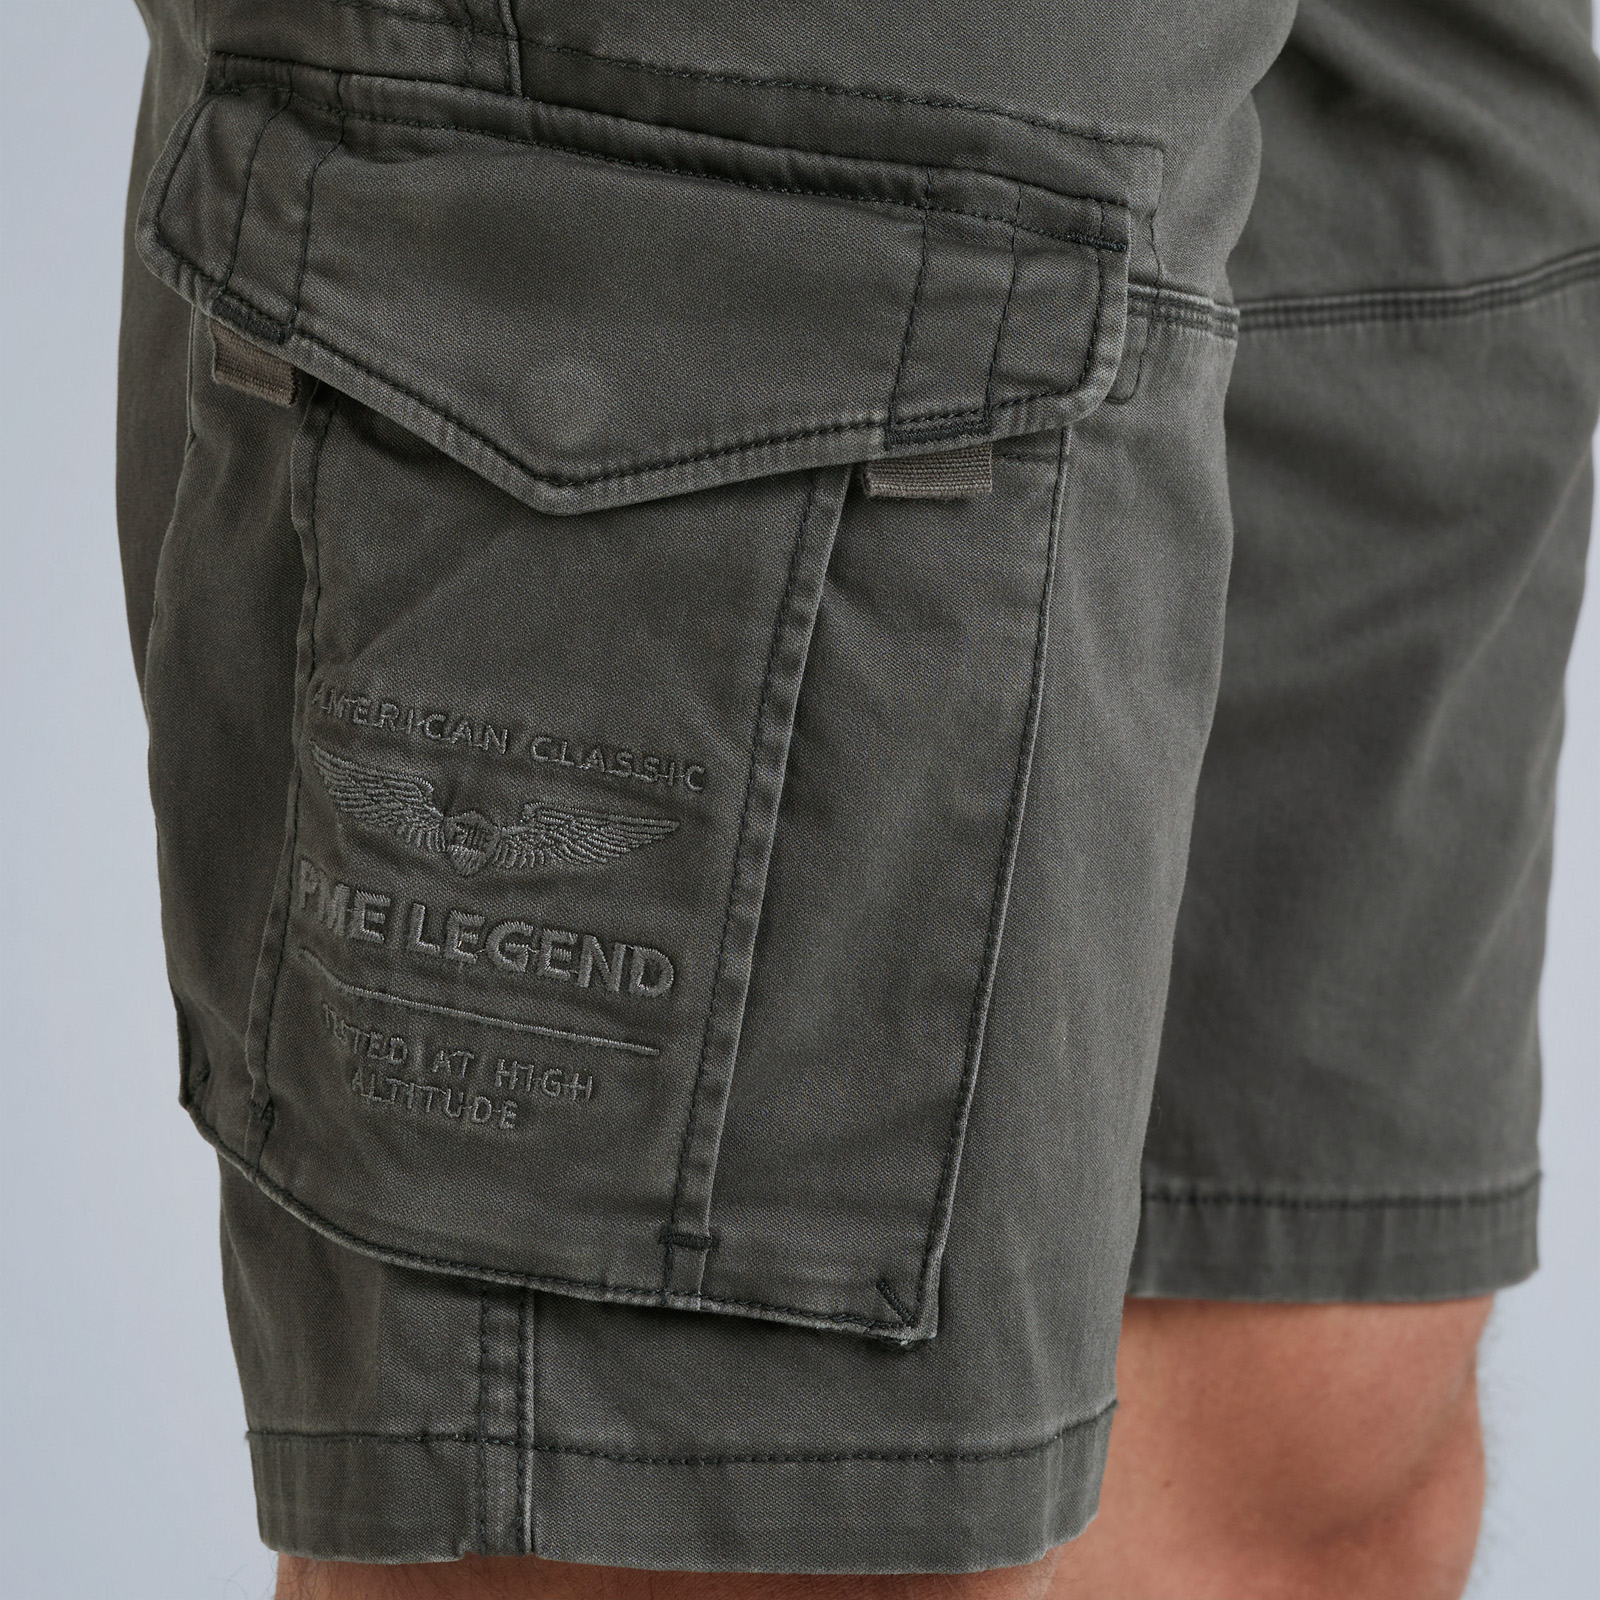 PME | and Cargo Free LEGEND shipping Short Twill returns | Stretch